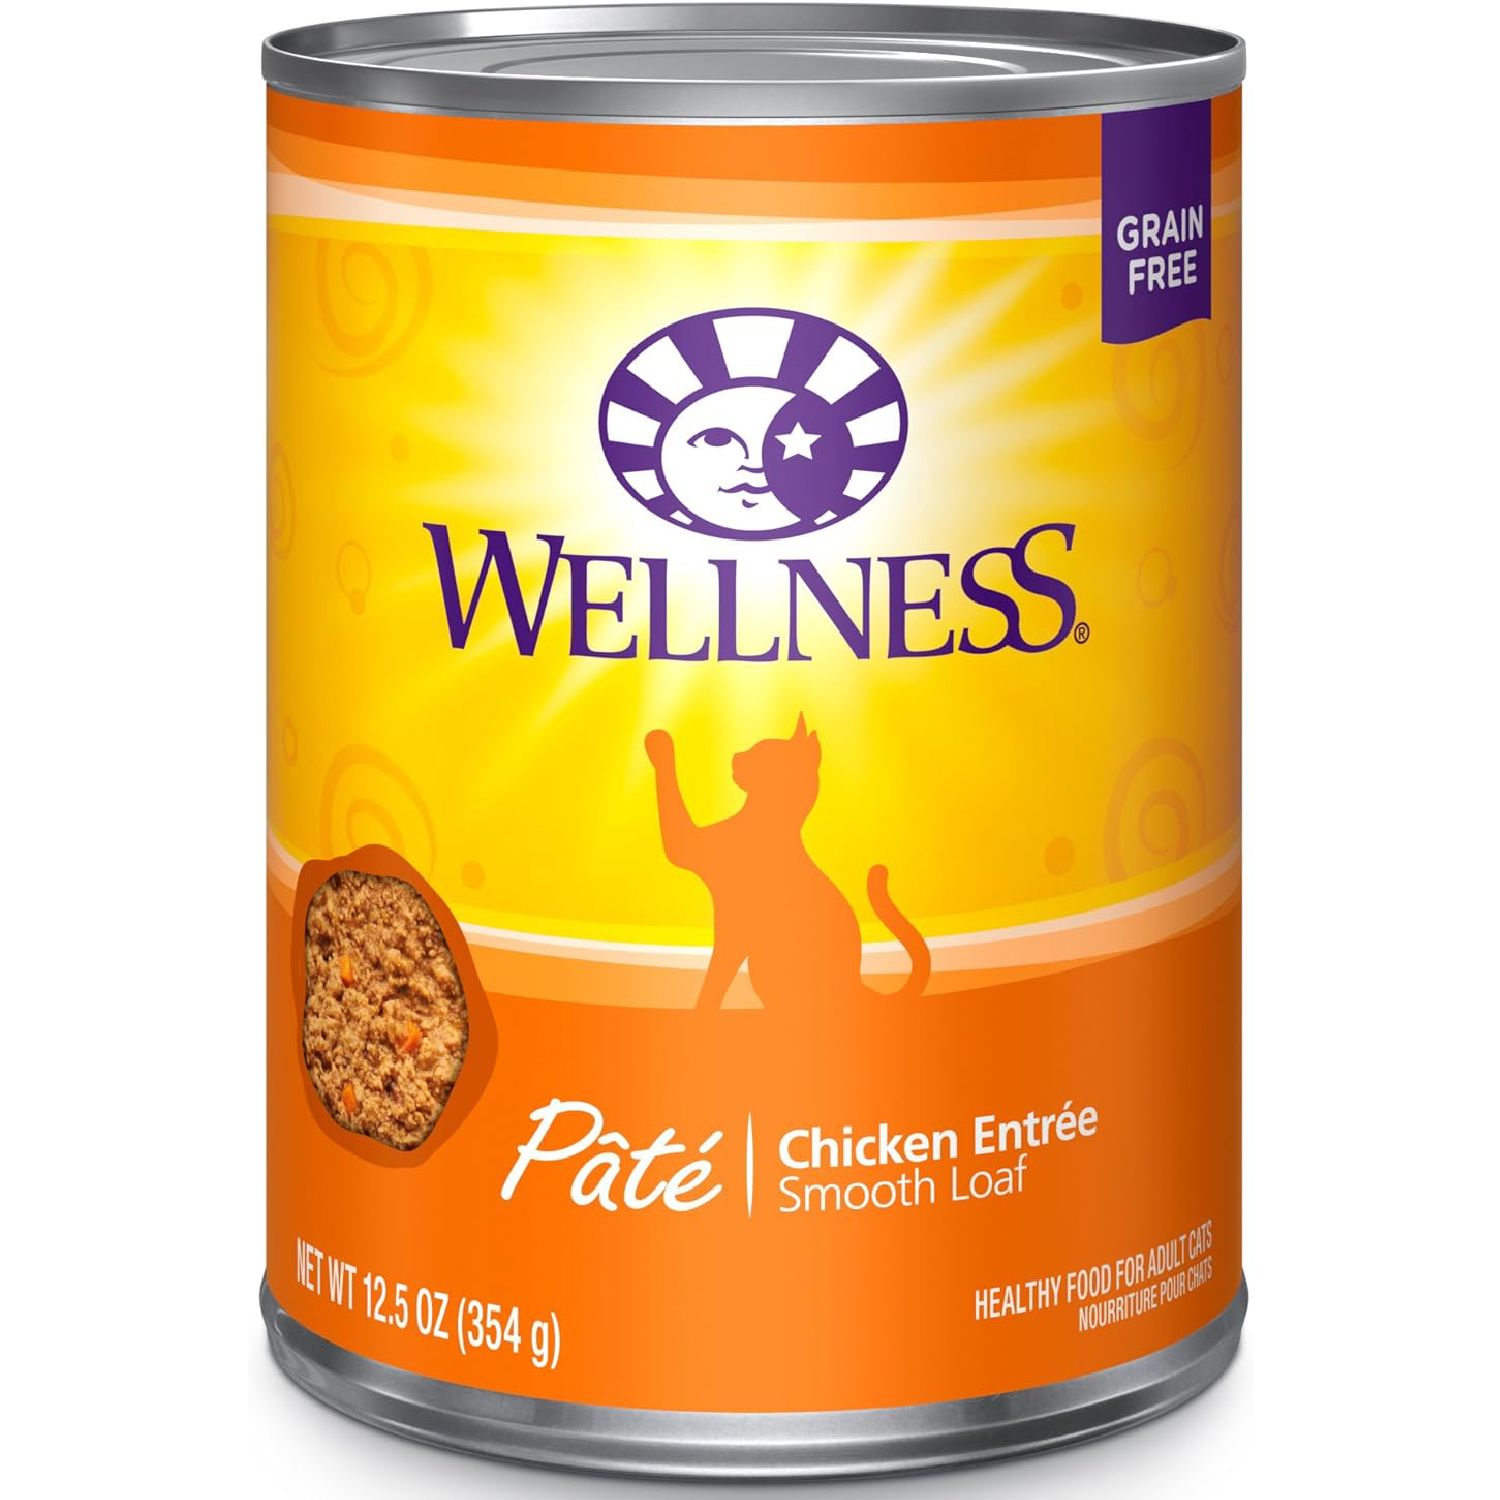 Wellness Pate Grain-Free Chicken Entree Canned Cat Food